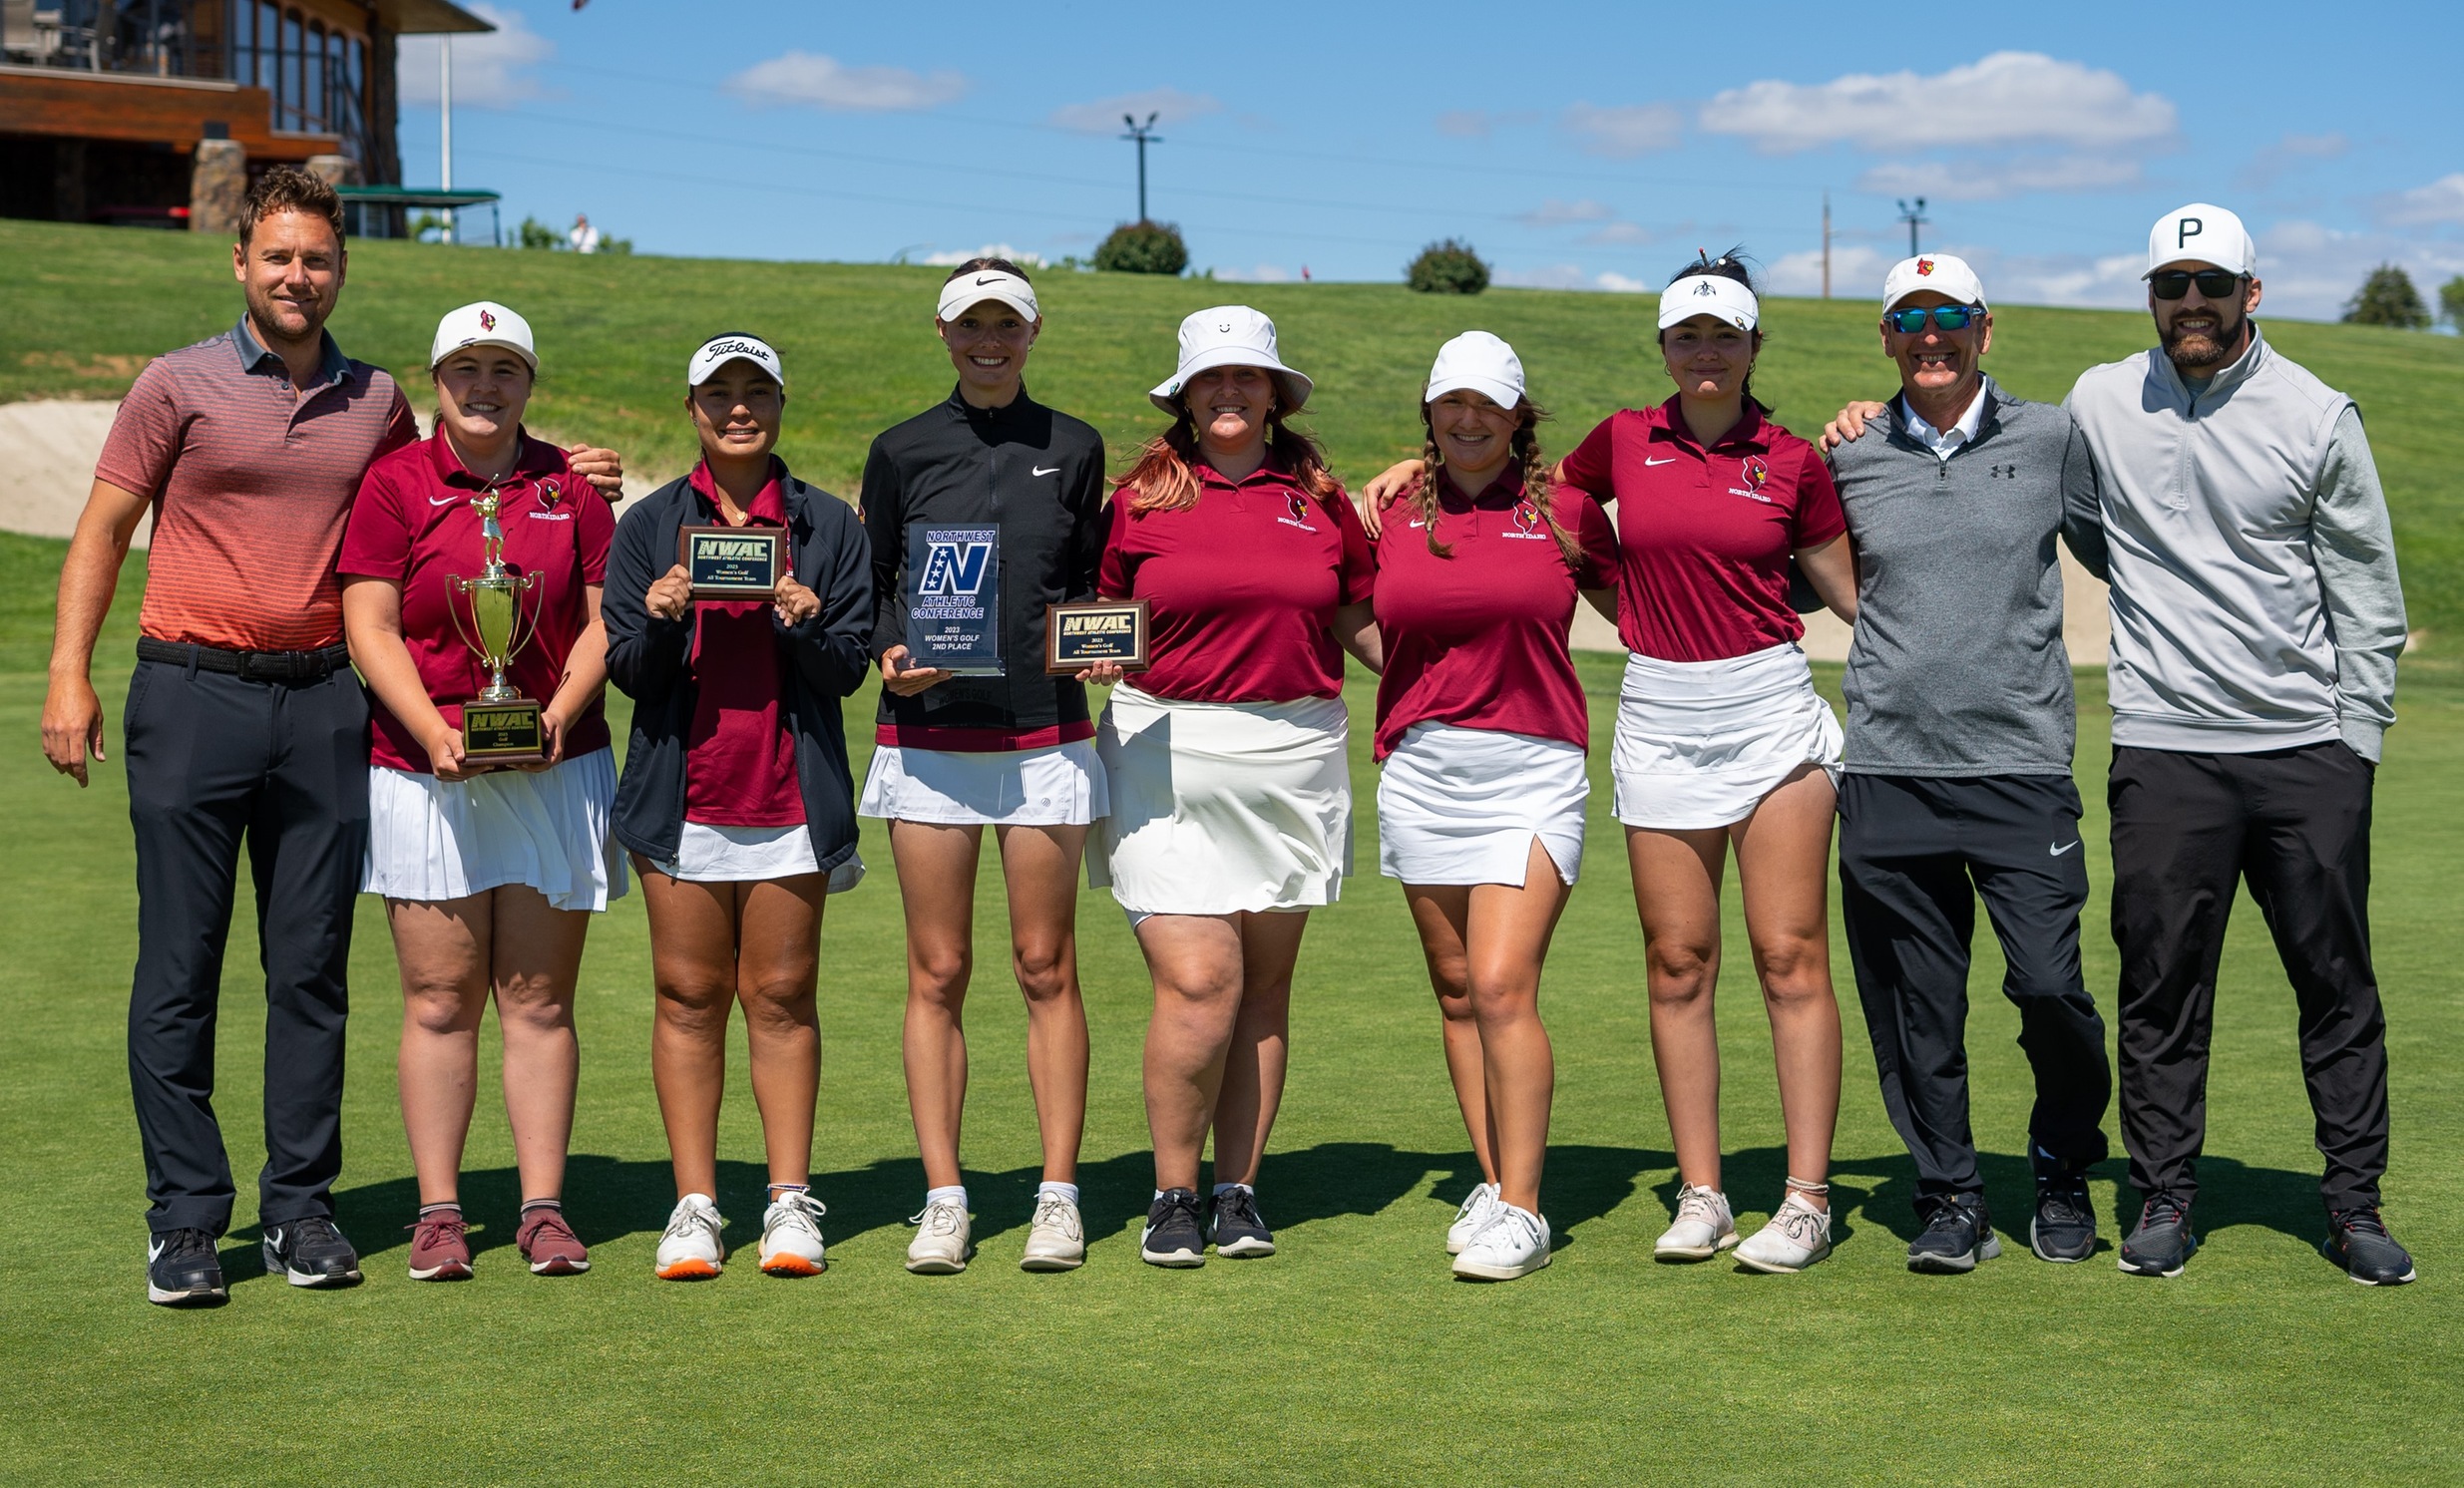 NIC women's golf team with 2nd place trophy at NWAC tournament